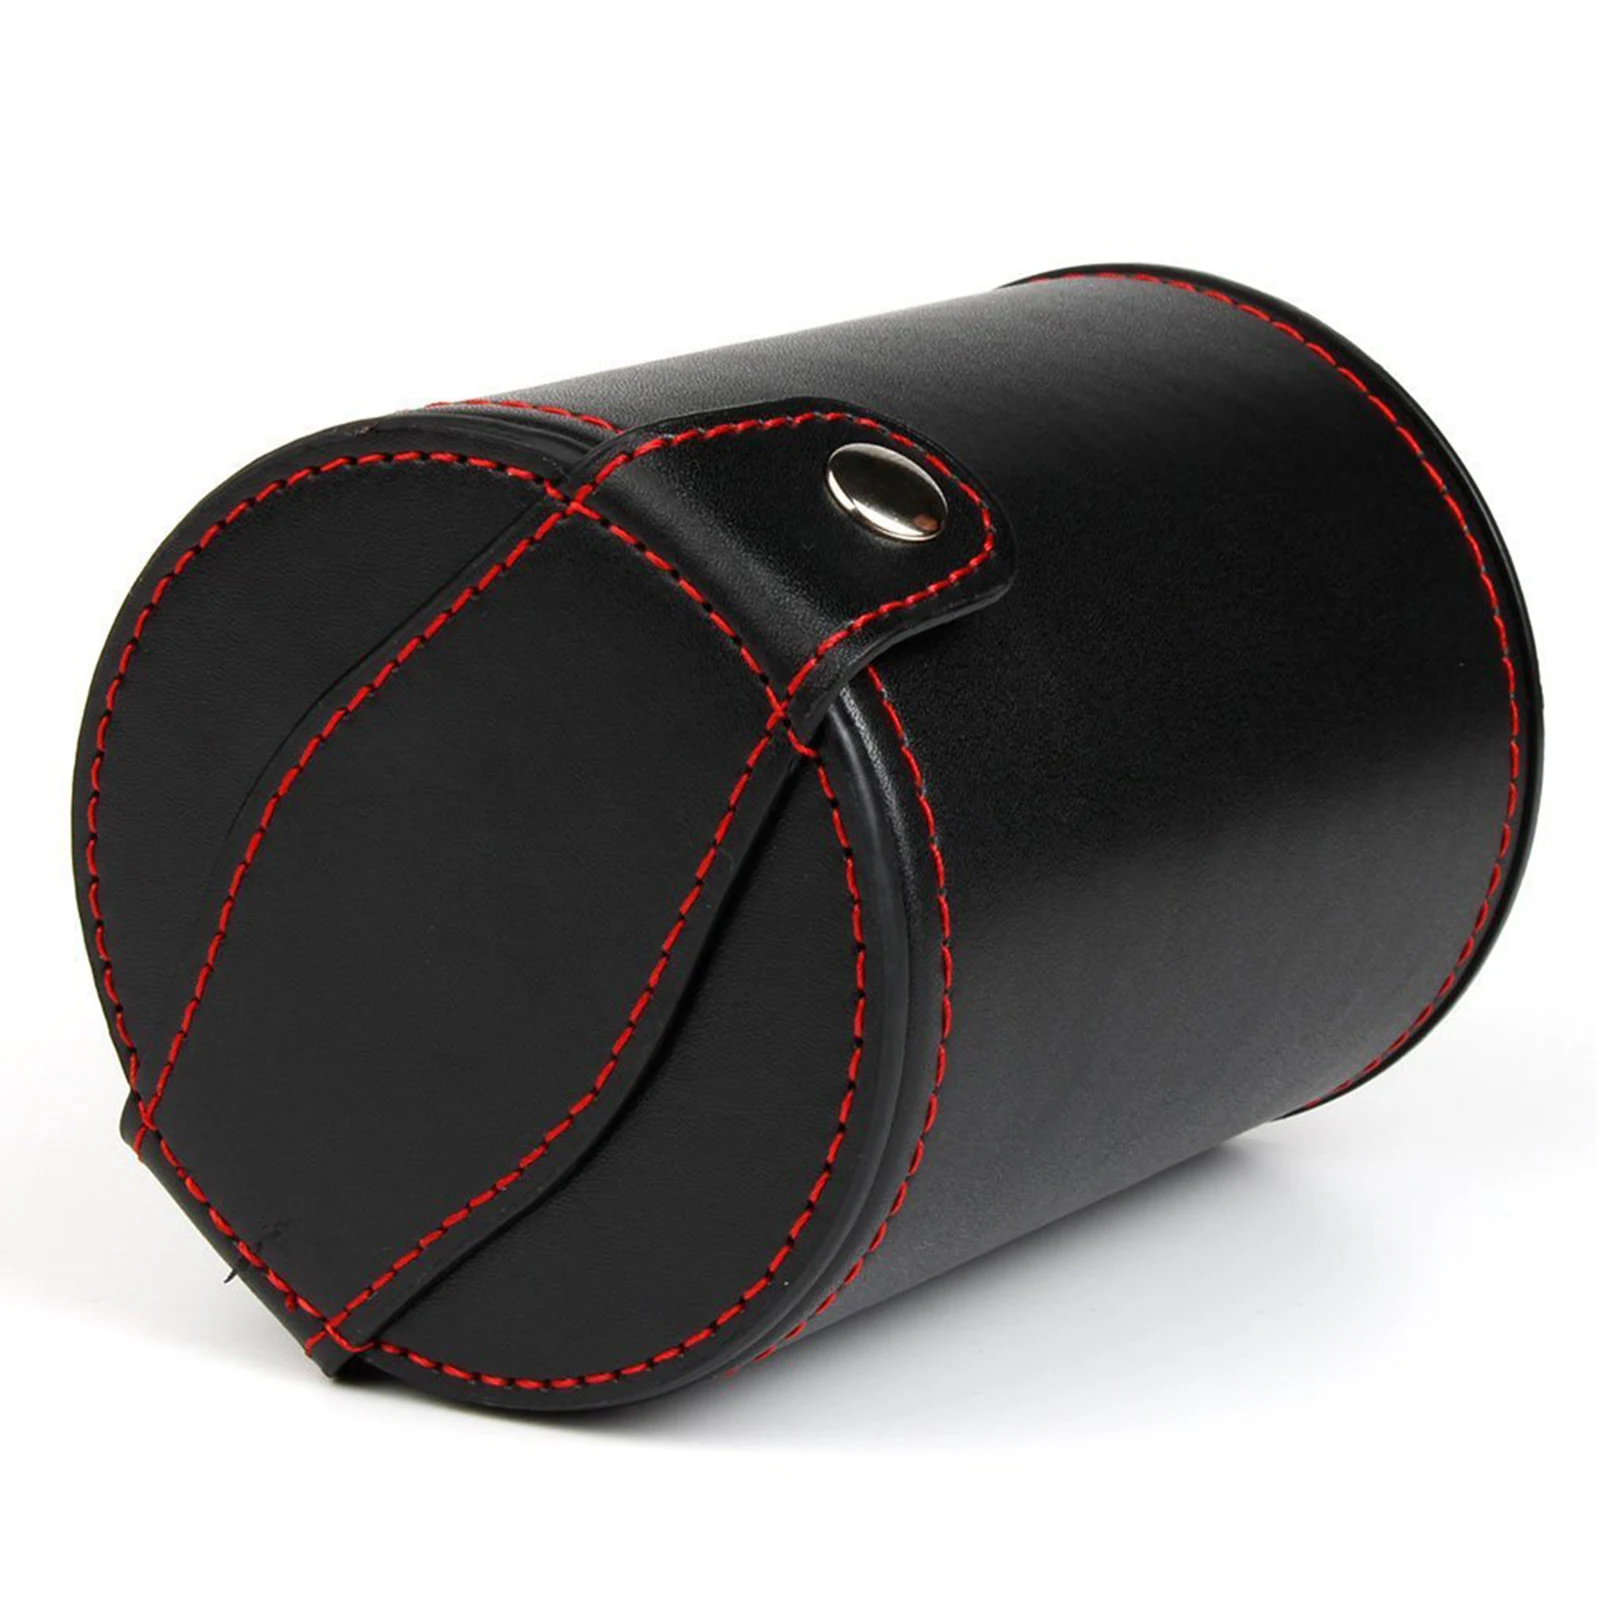 New Double layer Dice Cups Black PU Leather Red Flannel Dice Cup Bar Game Supplies With 5 pcs Dices